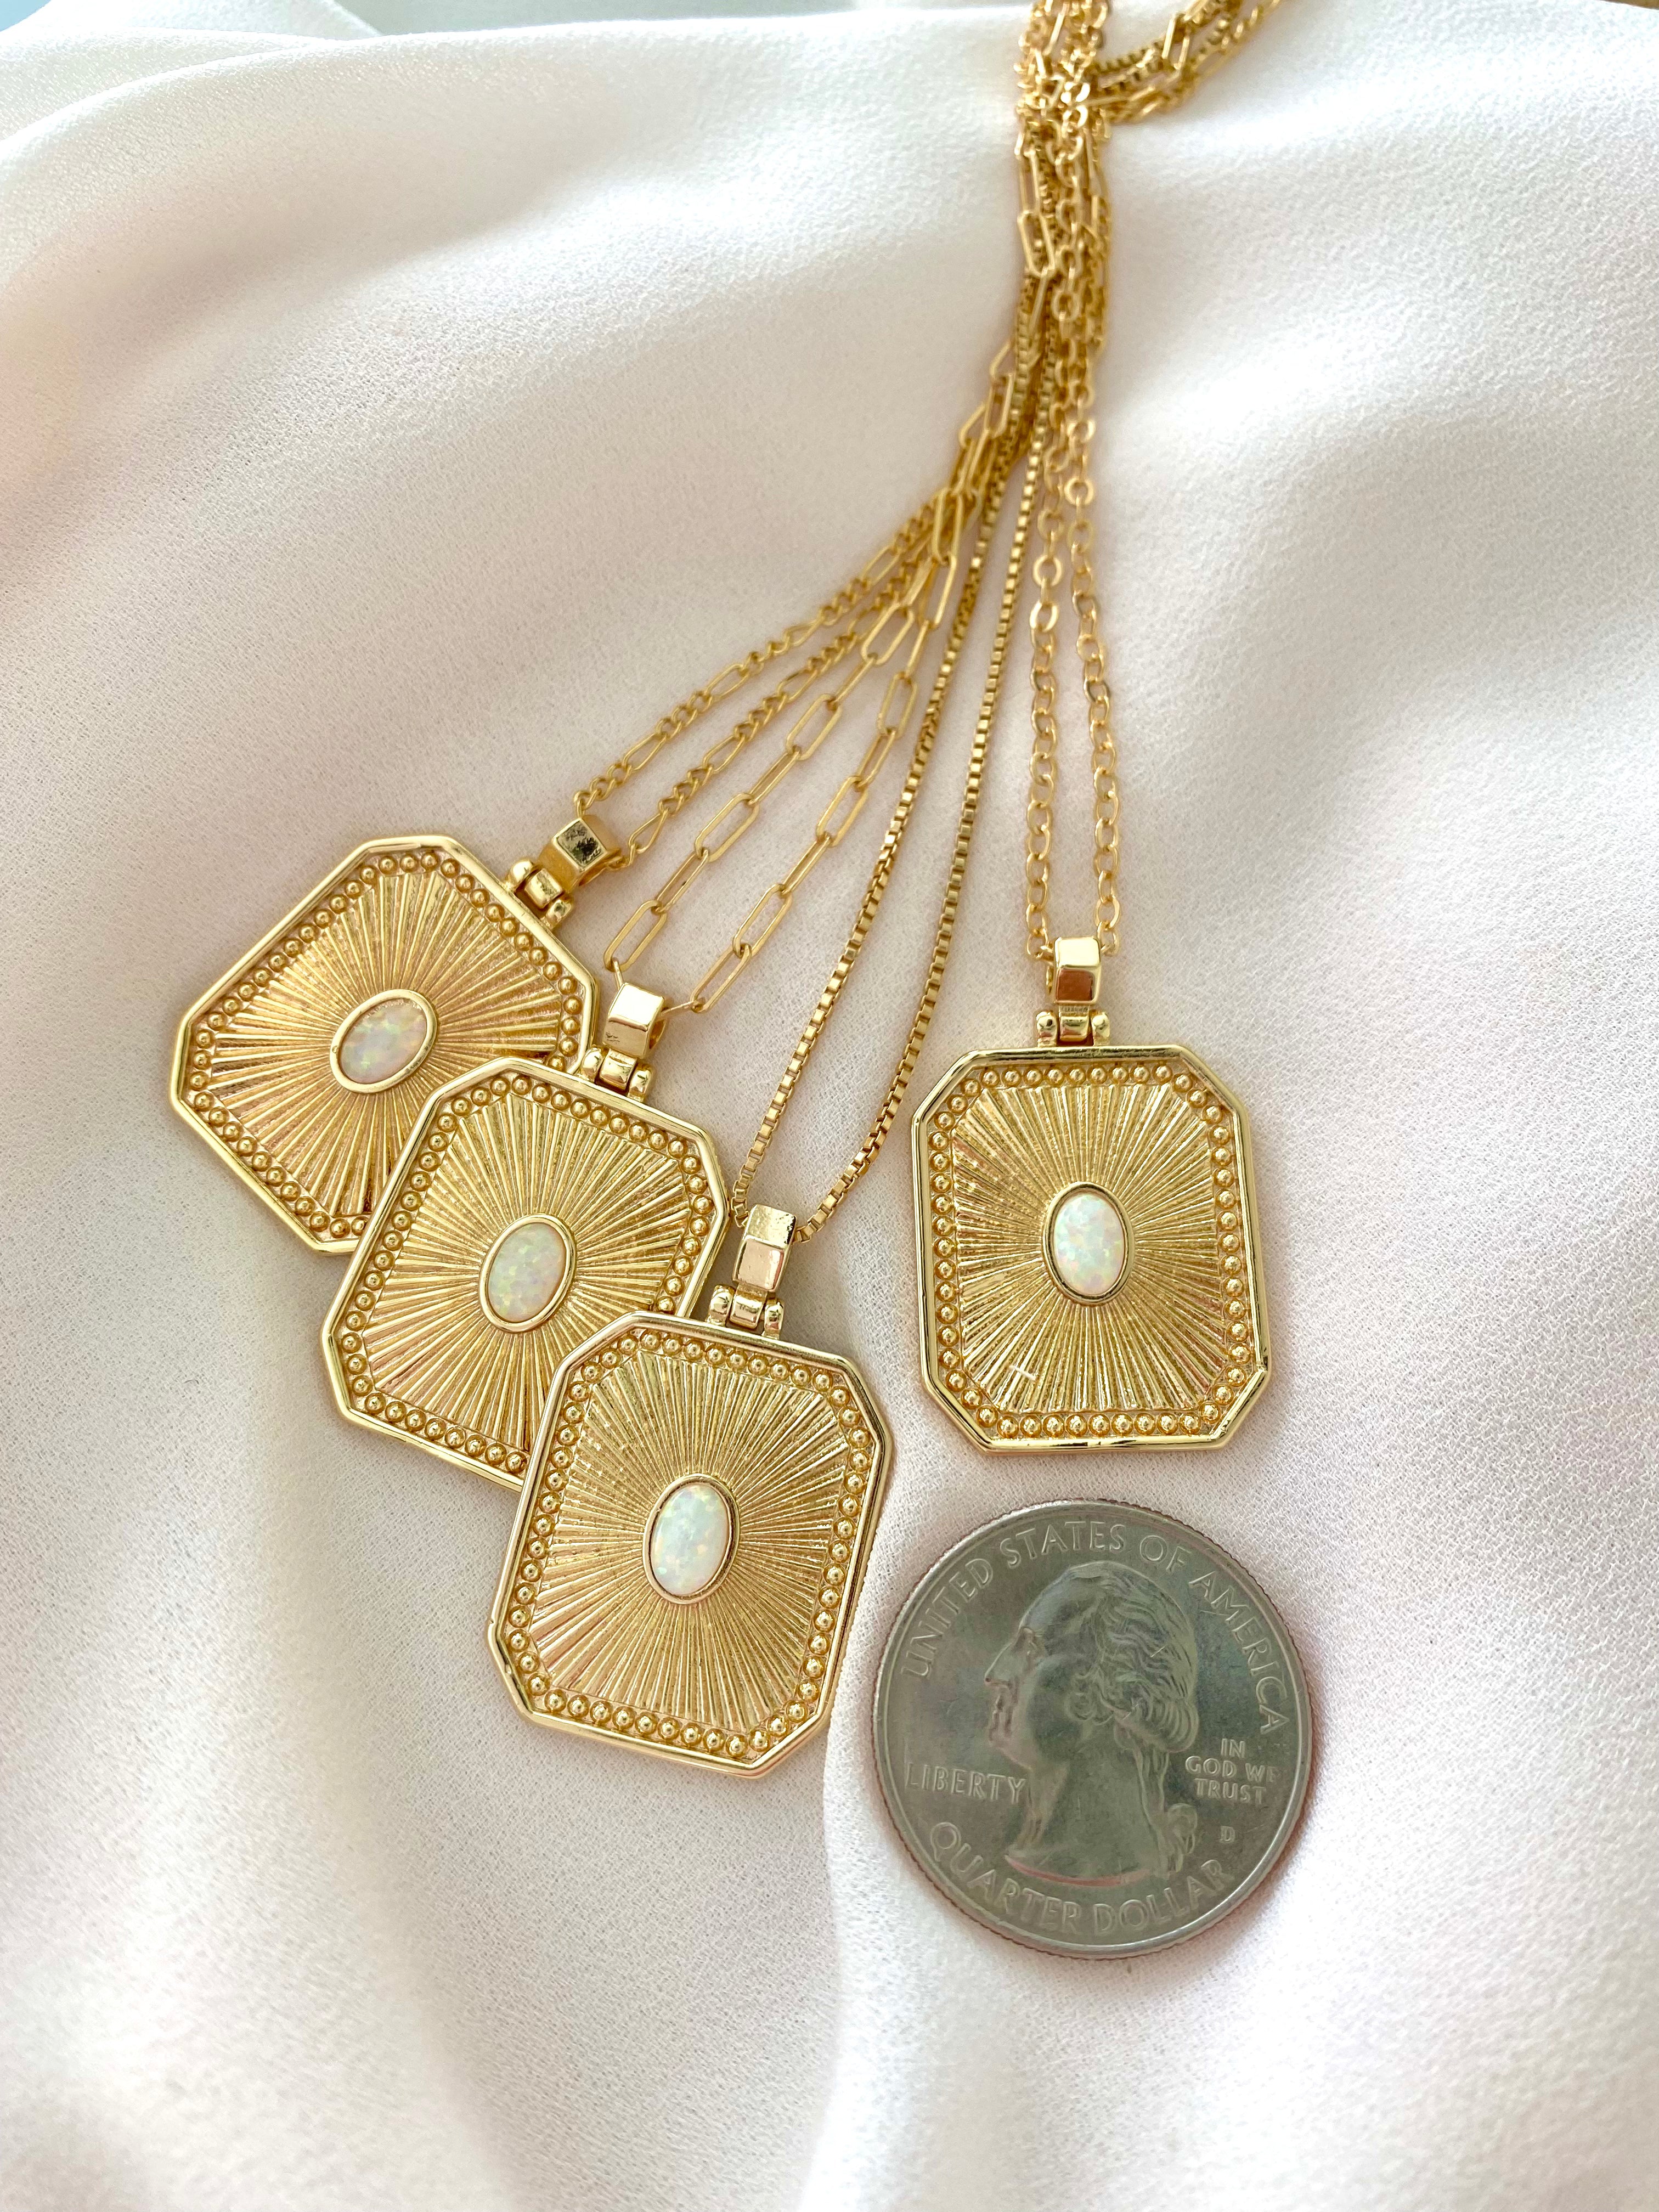 Large Opal Rectangle Medallion Necklace - Gold Filled Octagon Pendant - October Birthstone Jewelry